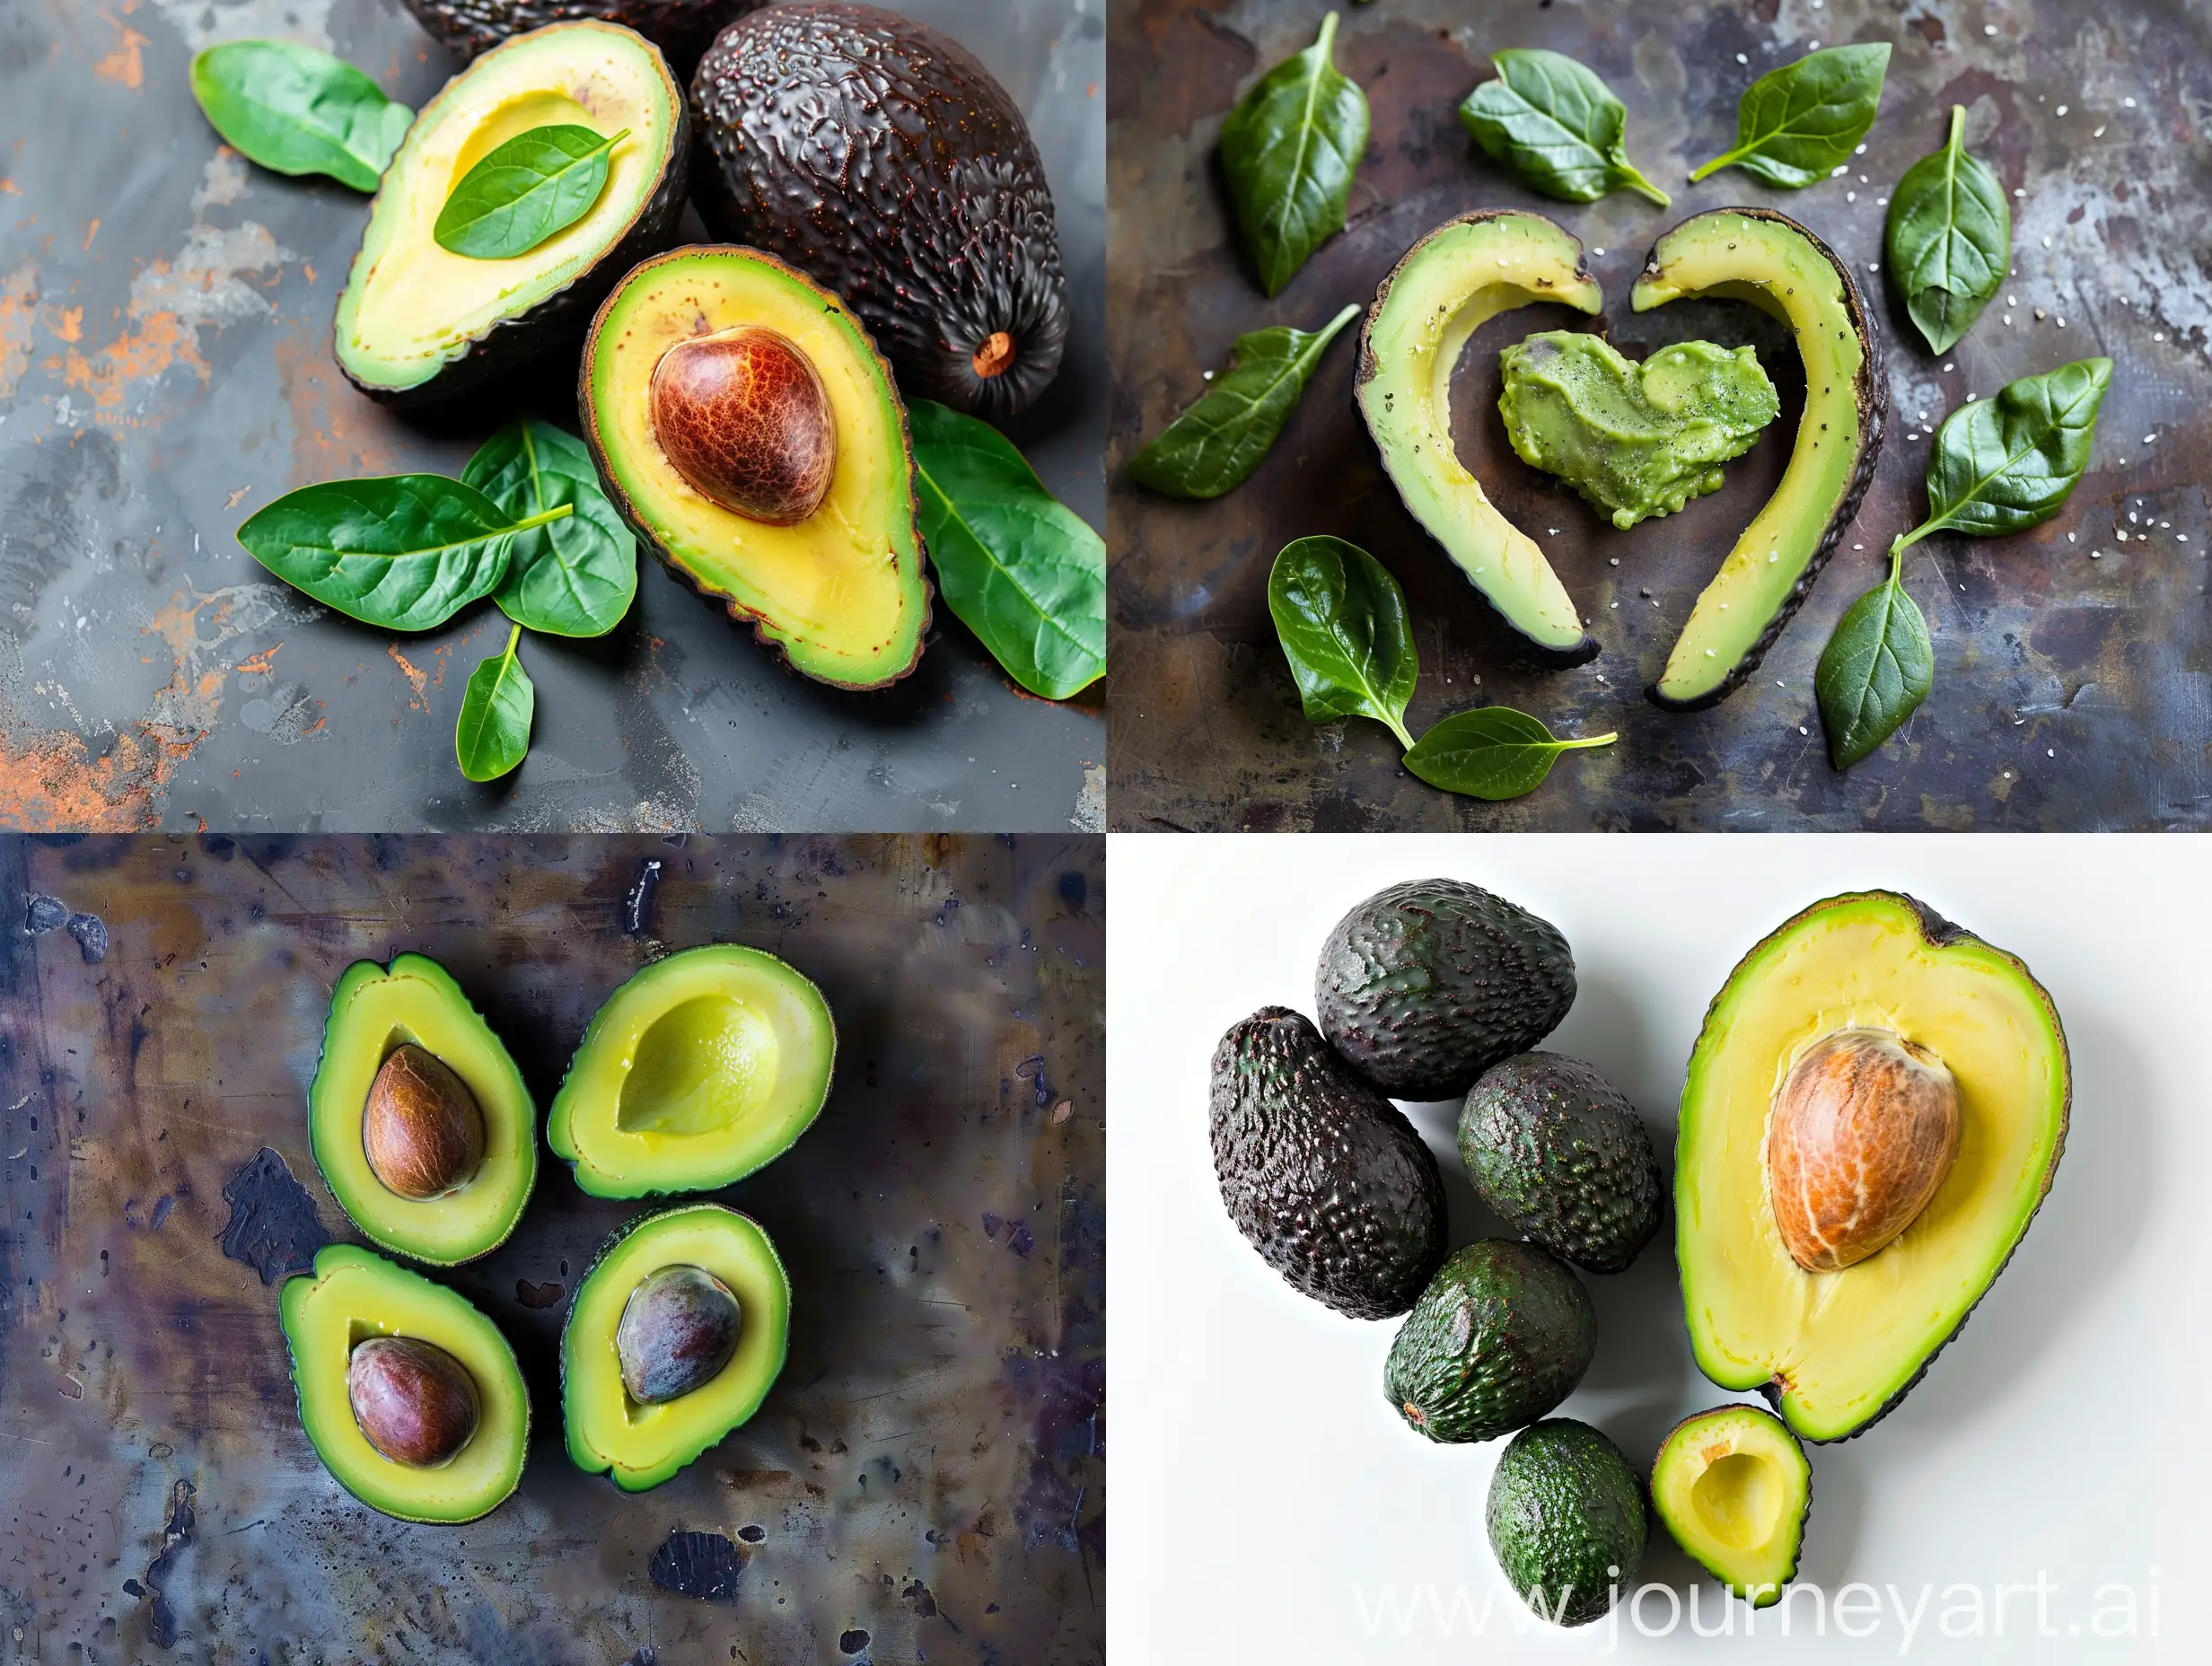 Heart-Health-Poster-Featuring-Avocado-Benefits